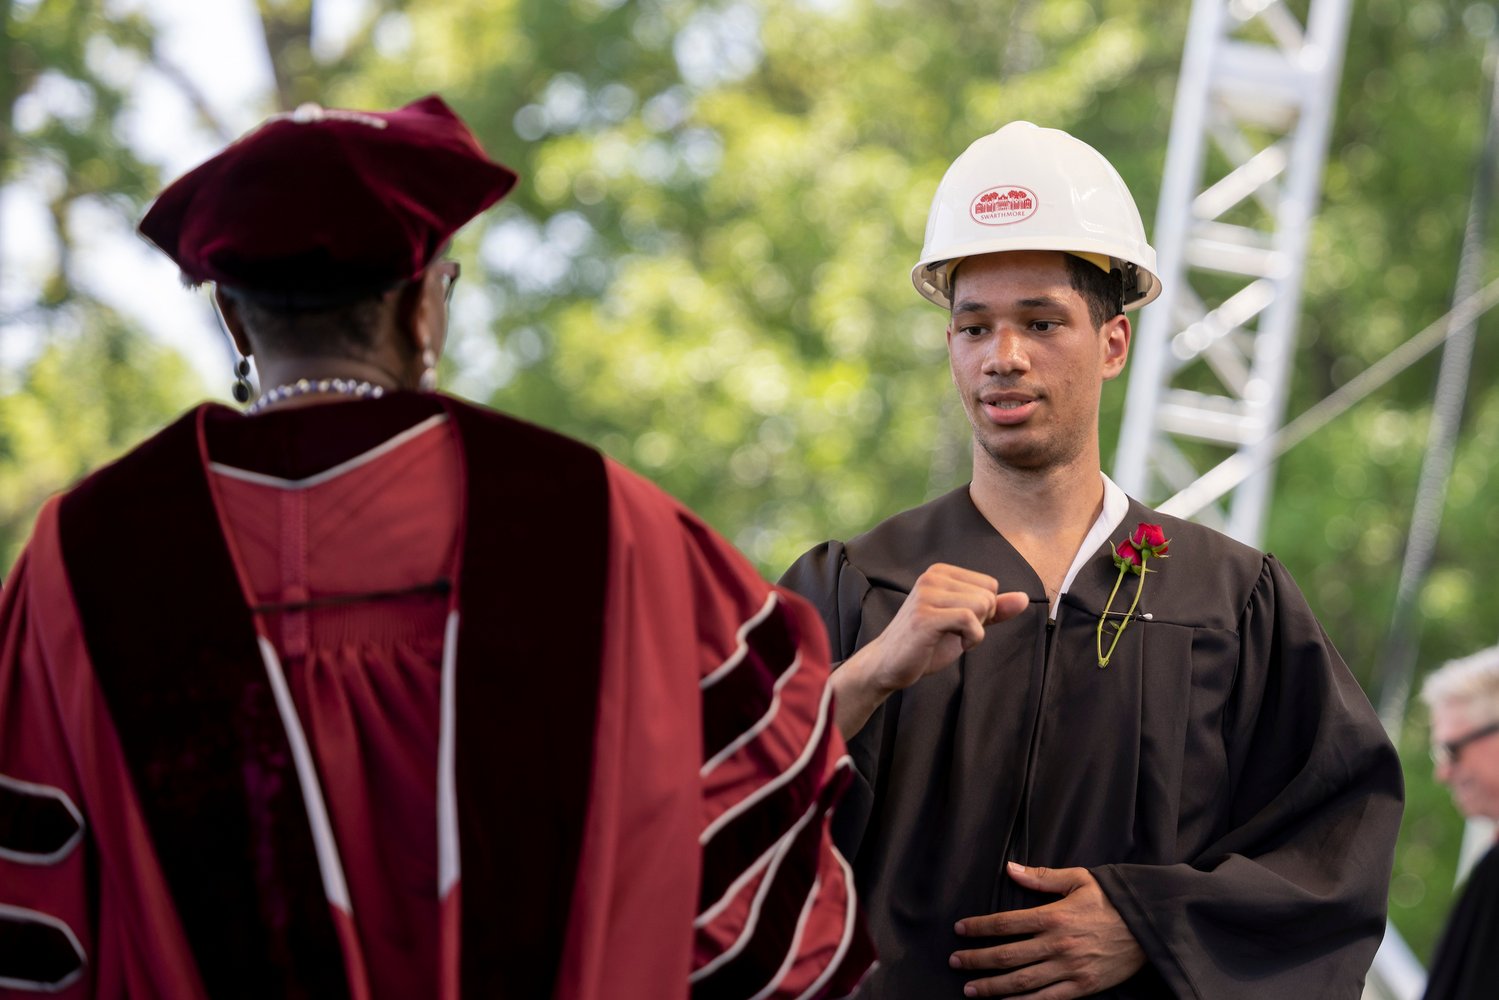 Student wearing hard hat elbow bumps president smith